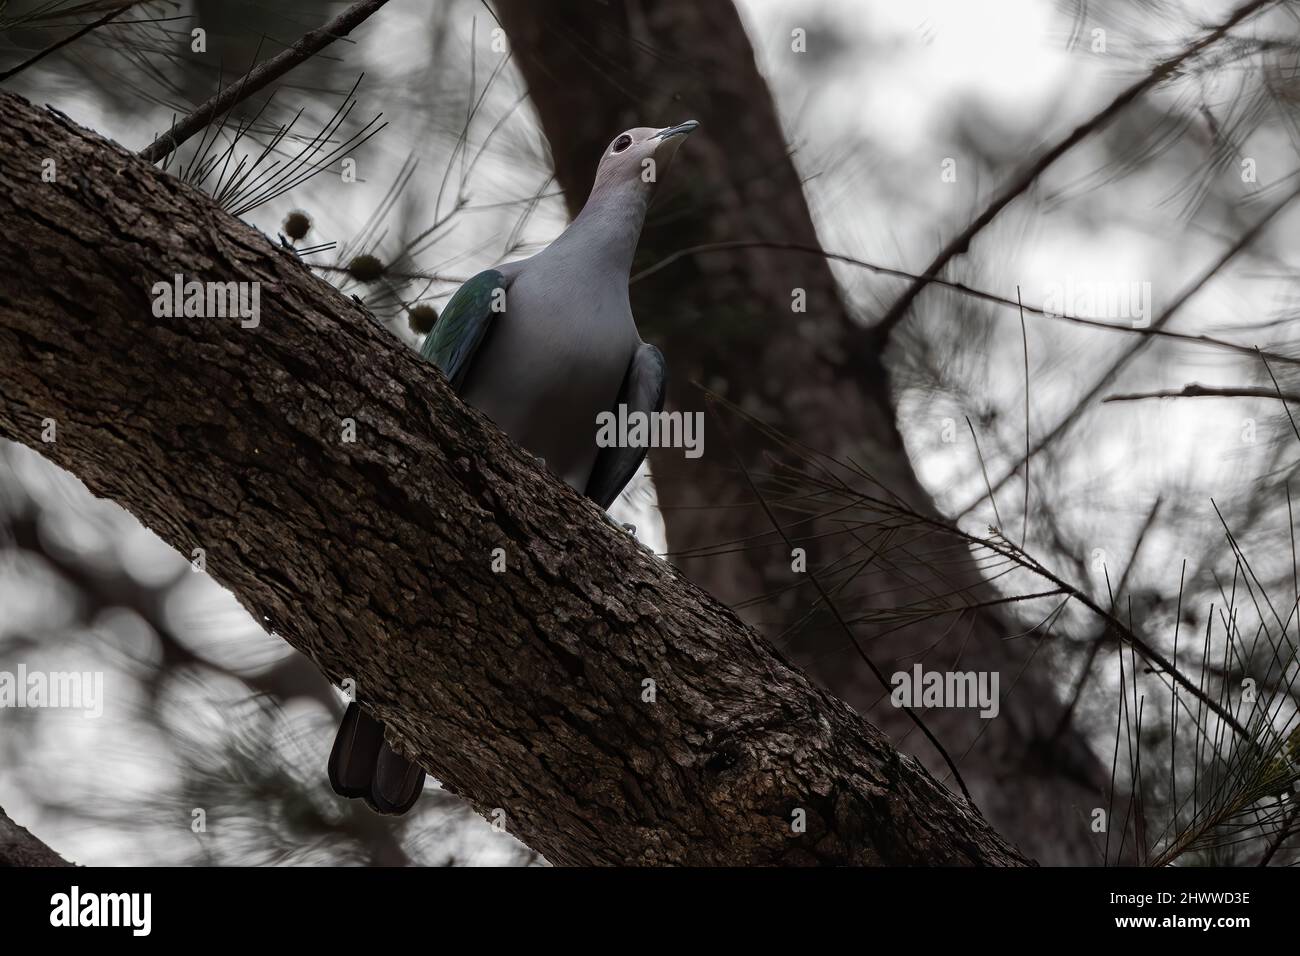 Green Imperial Pigeon perched on the tree branch. Stock Photo